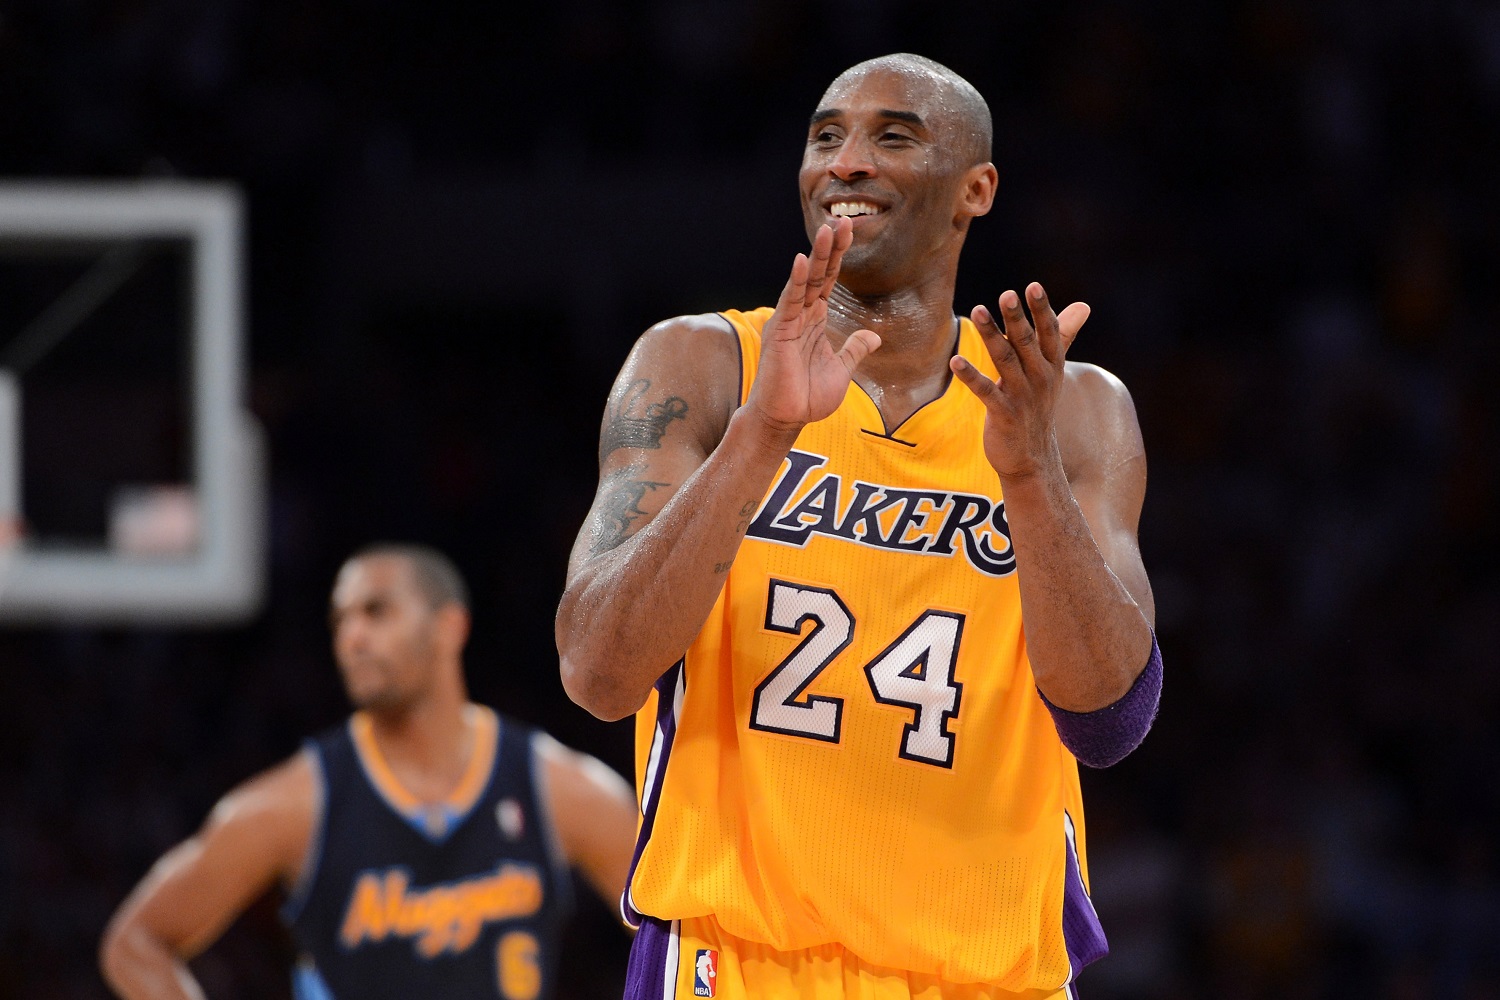 Kobe Bryant credited some of his basketball success to what he learned while playing soccer in Italy.